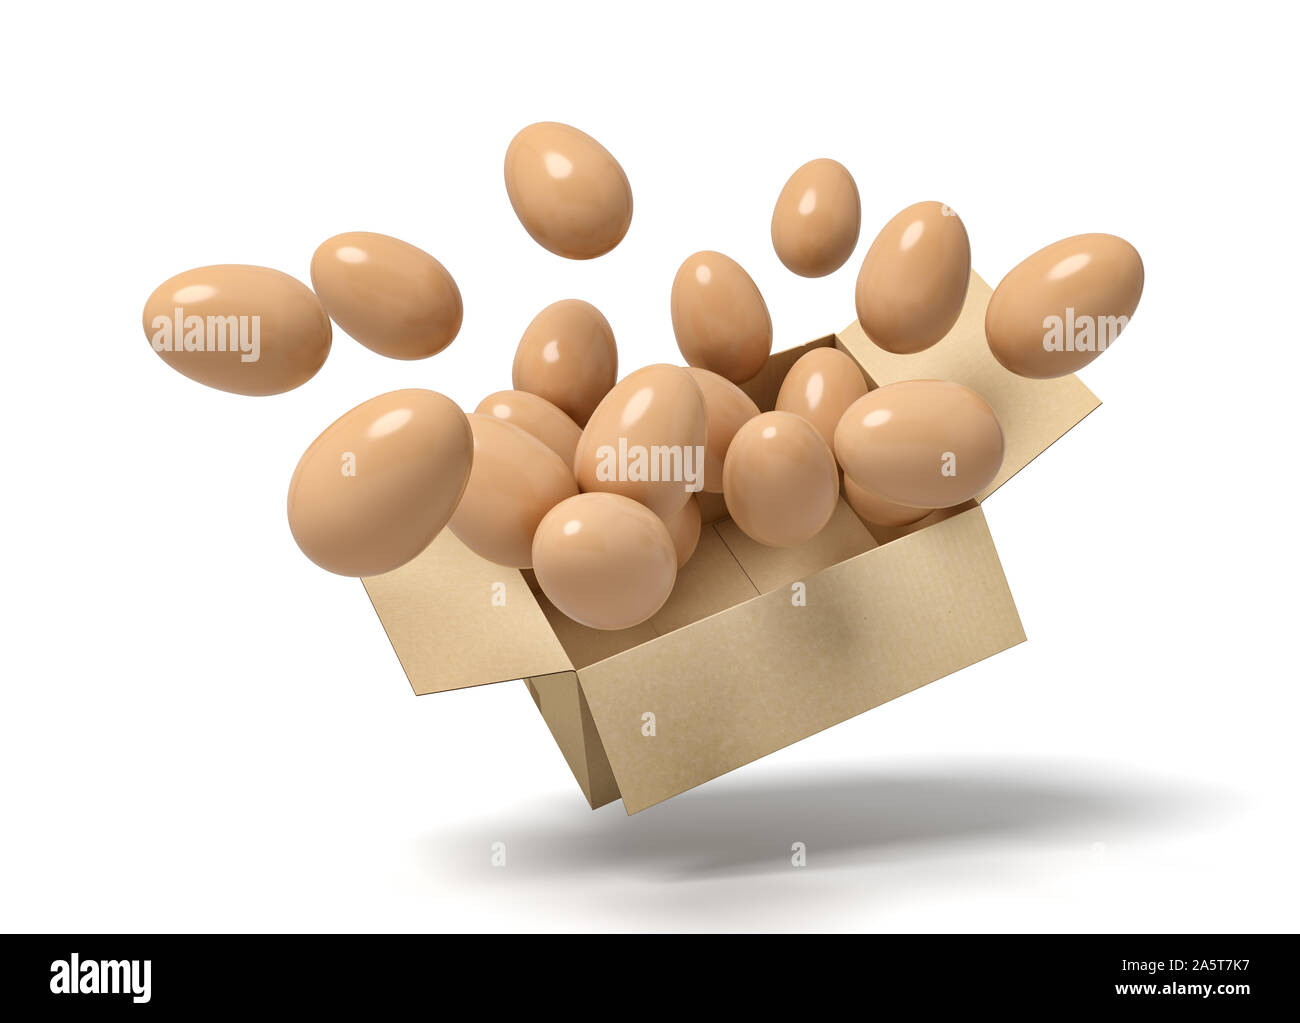 3d rendering of cardboard box in air full of chicken eggs flying out from it. Stock Photo